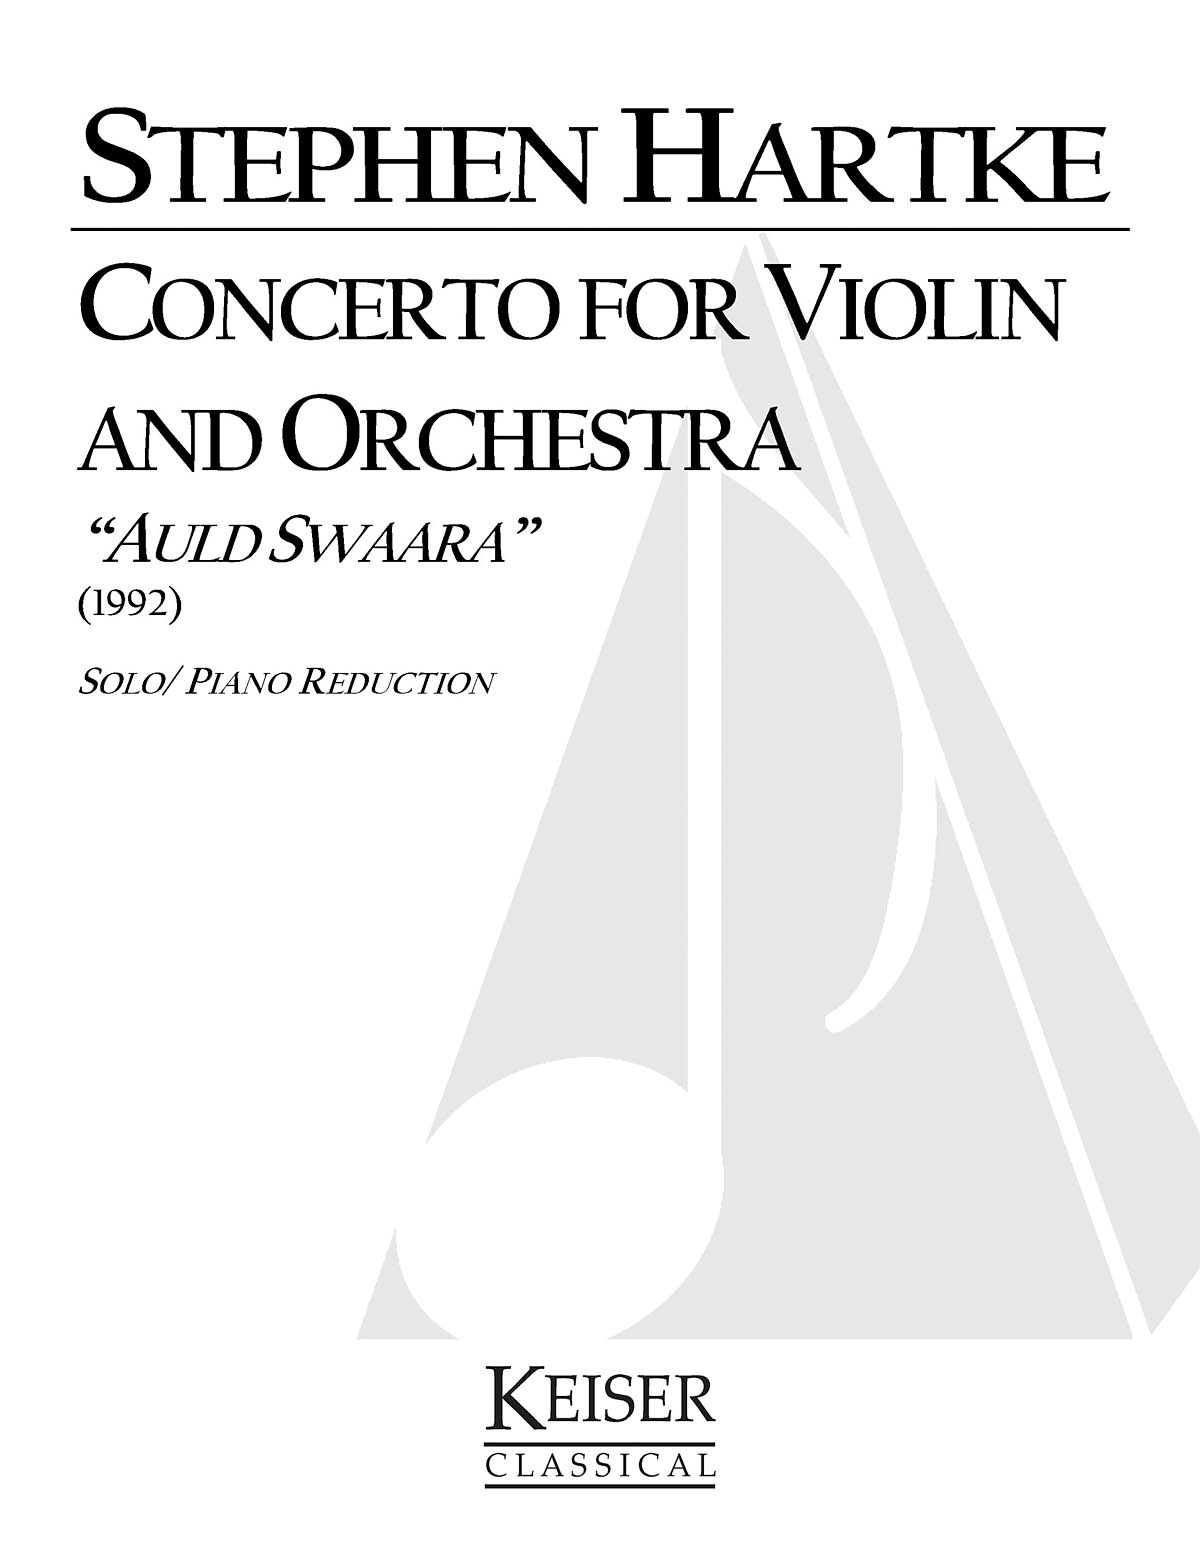 Concerto for Violin and Orchestra: Auld Swaara